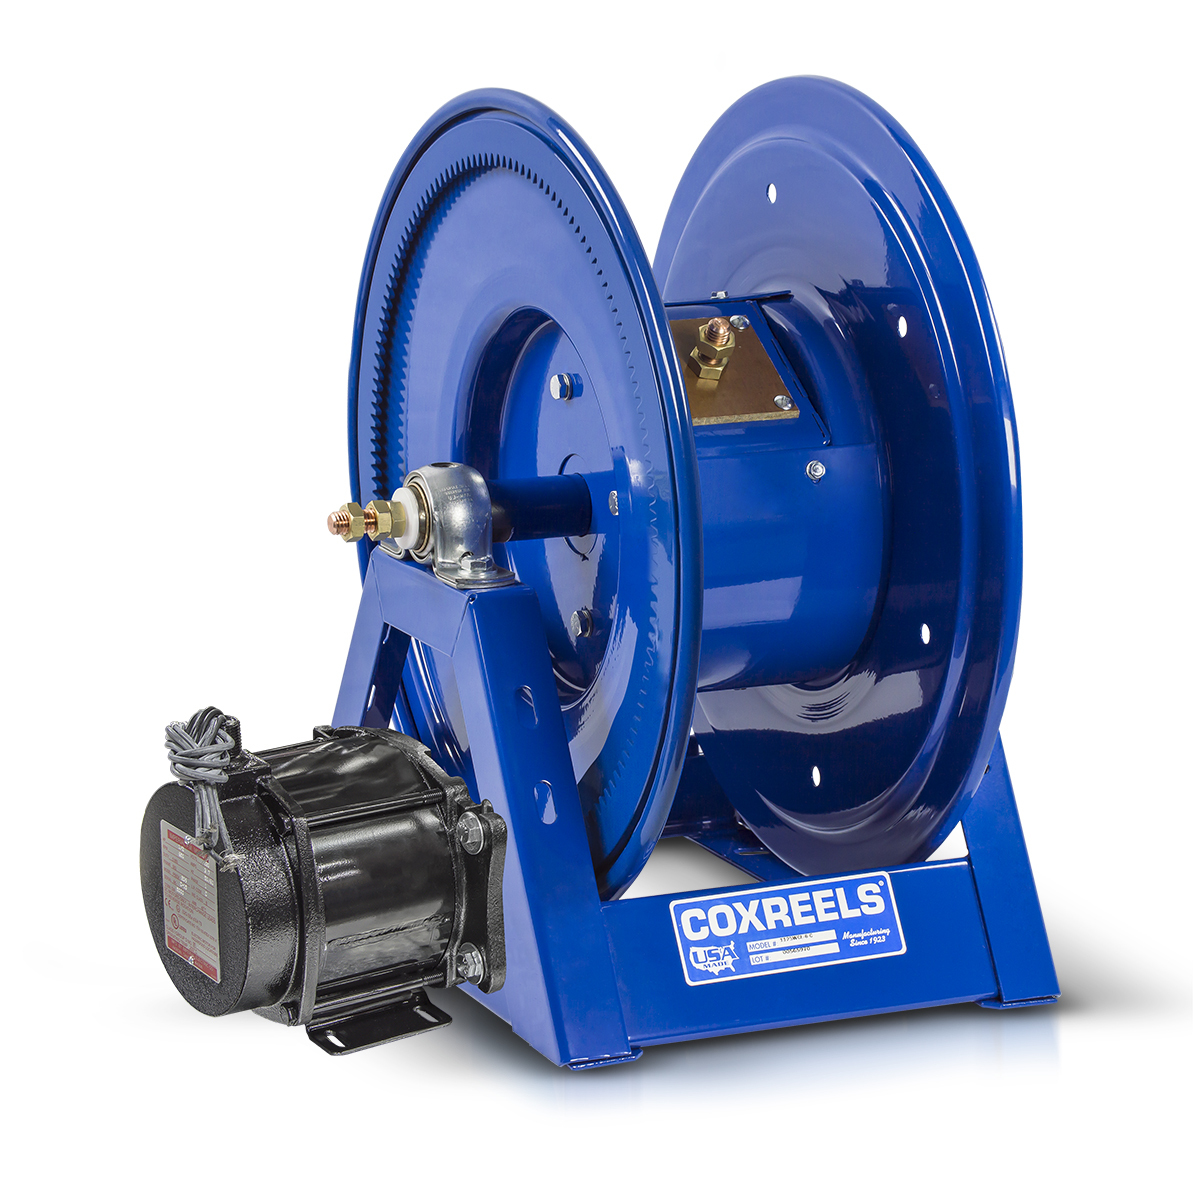 Coxreels 1125WCL-6-ED 12V DC 1/2HP Motoized Welding Cable Reel Up to 2AWGx300ft